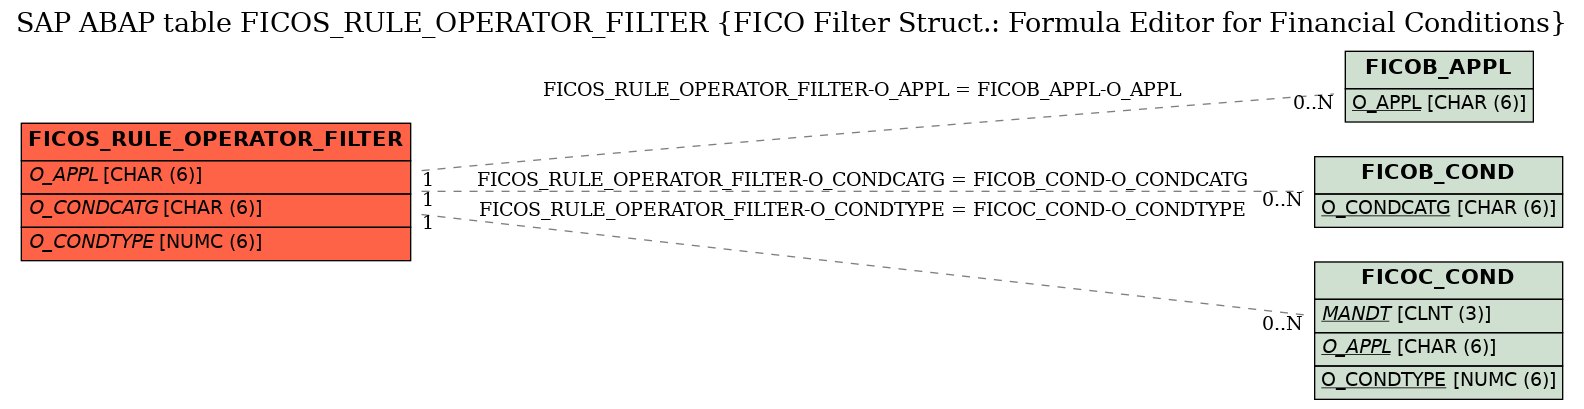 E-R Diagram for table FICOS_RULE_OPERATOR_FILTER (FICO Filter Struct.: Formula Editor for Financial Conditions)